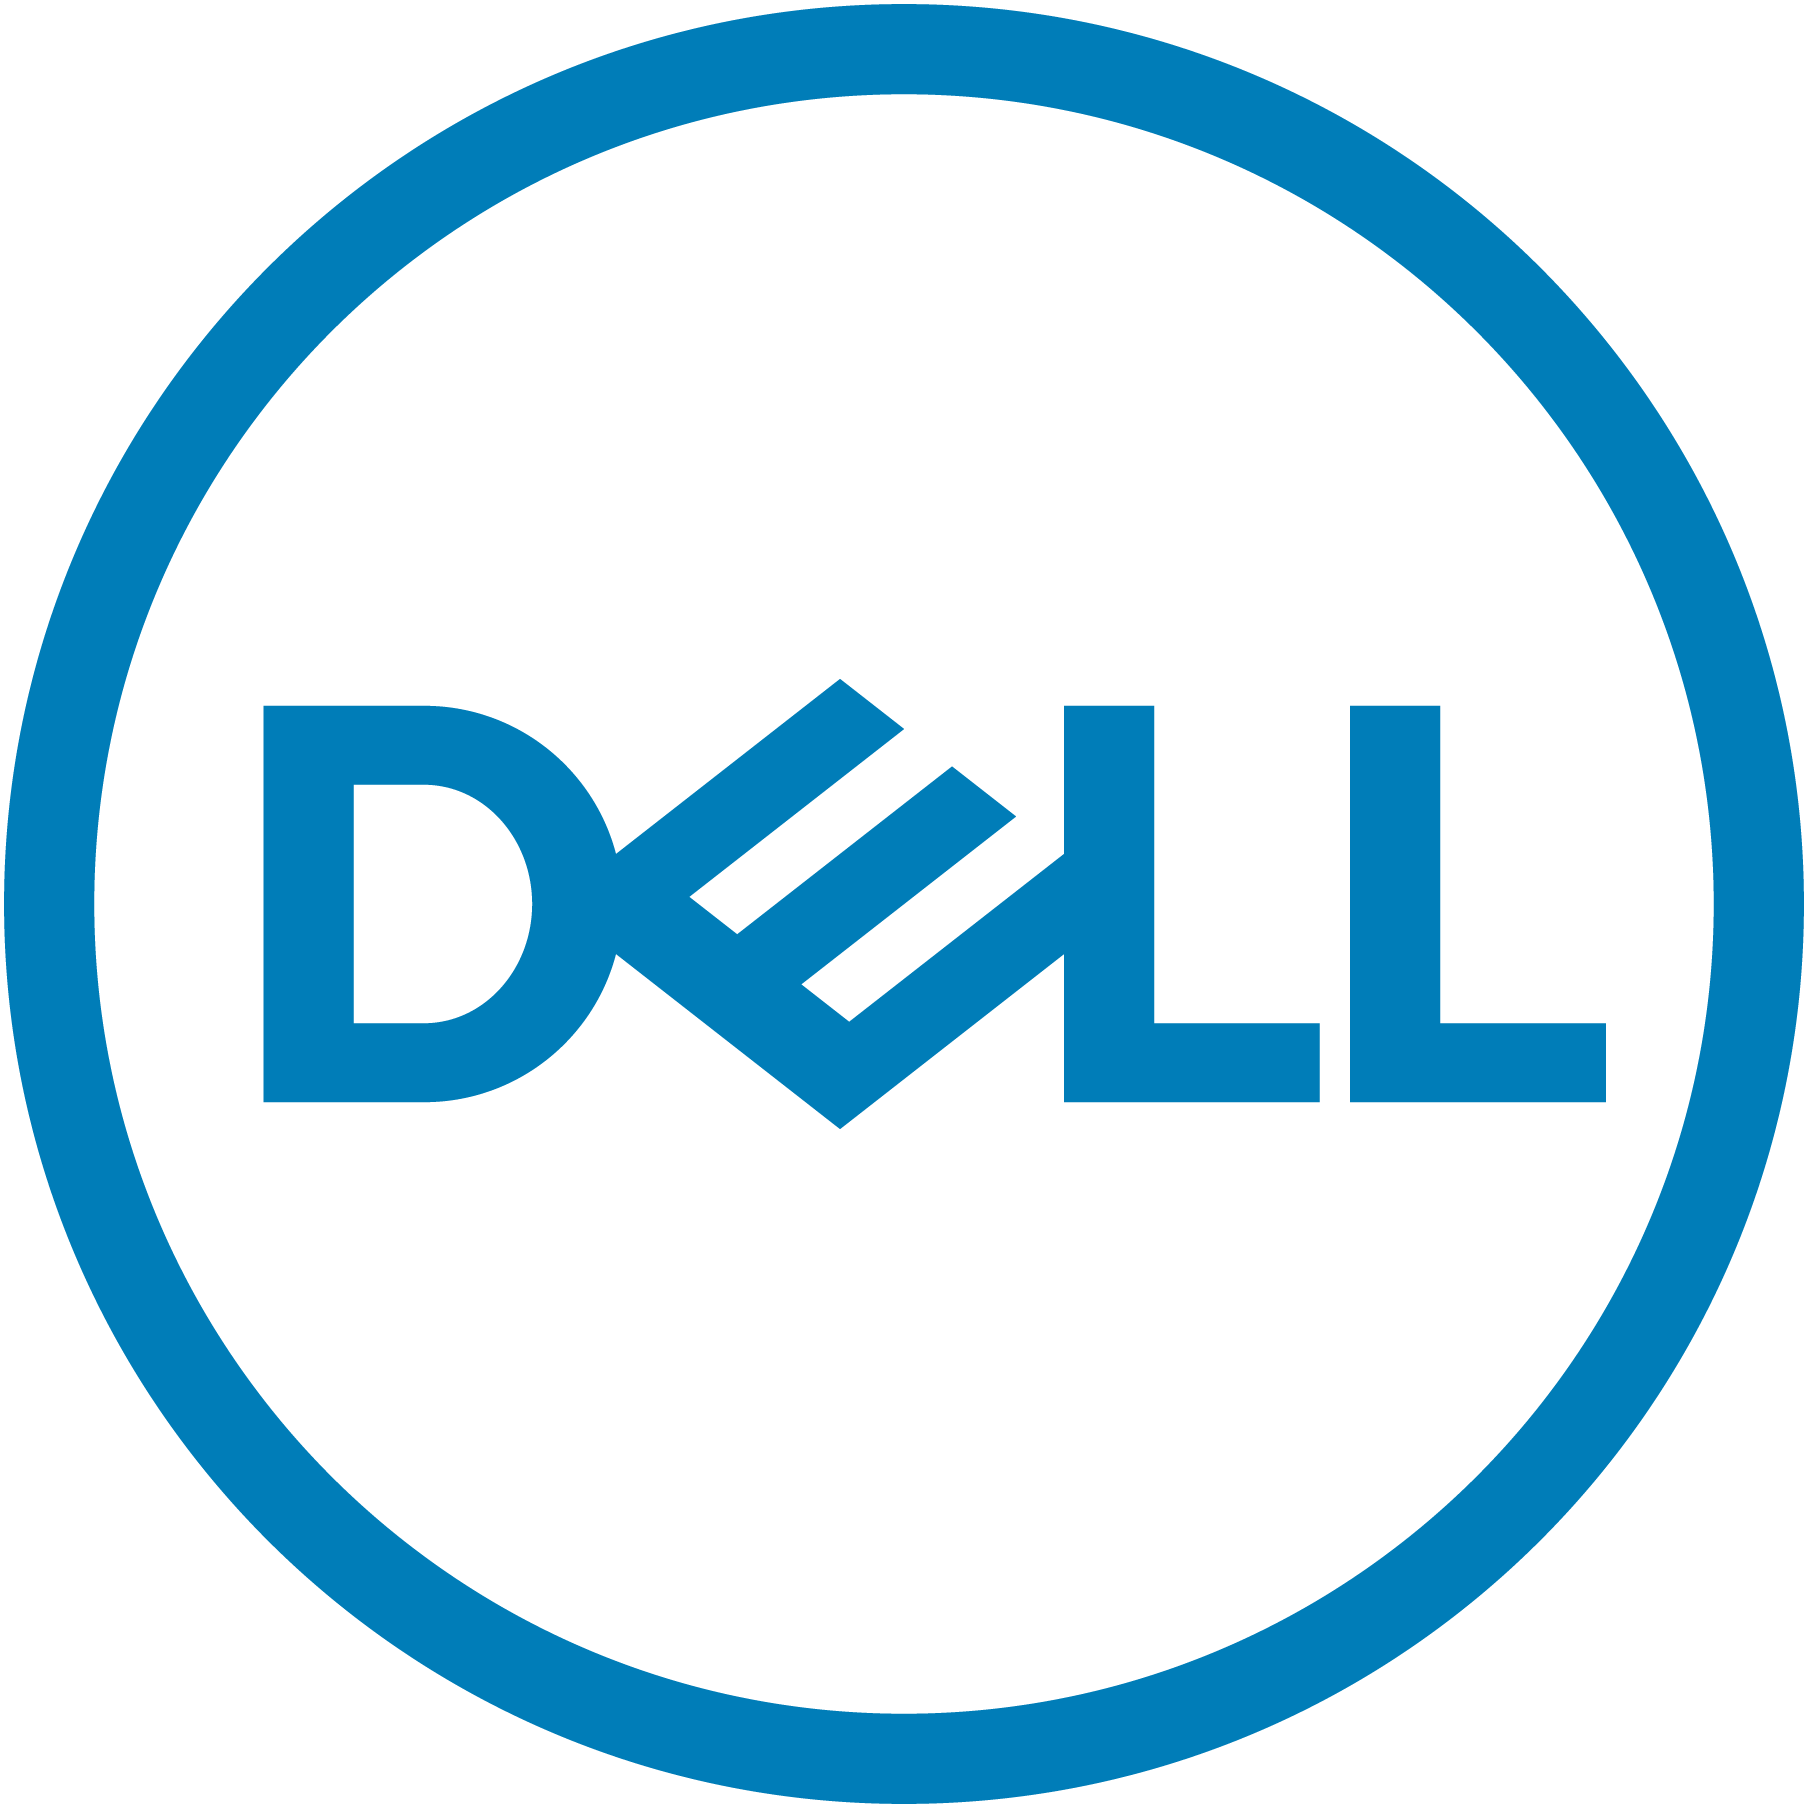 Image - Connection - Partner - Dell